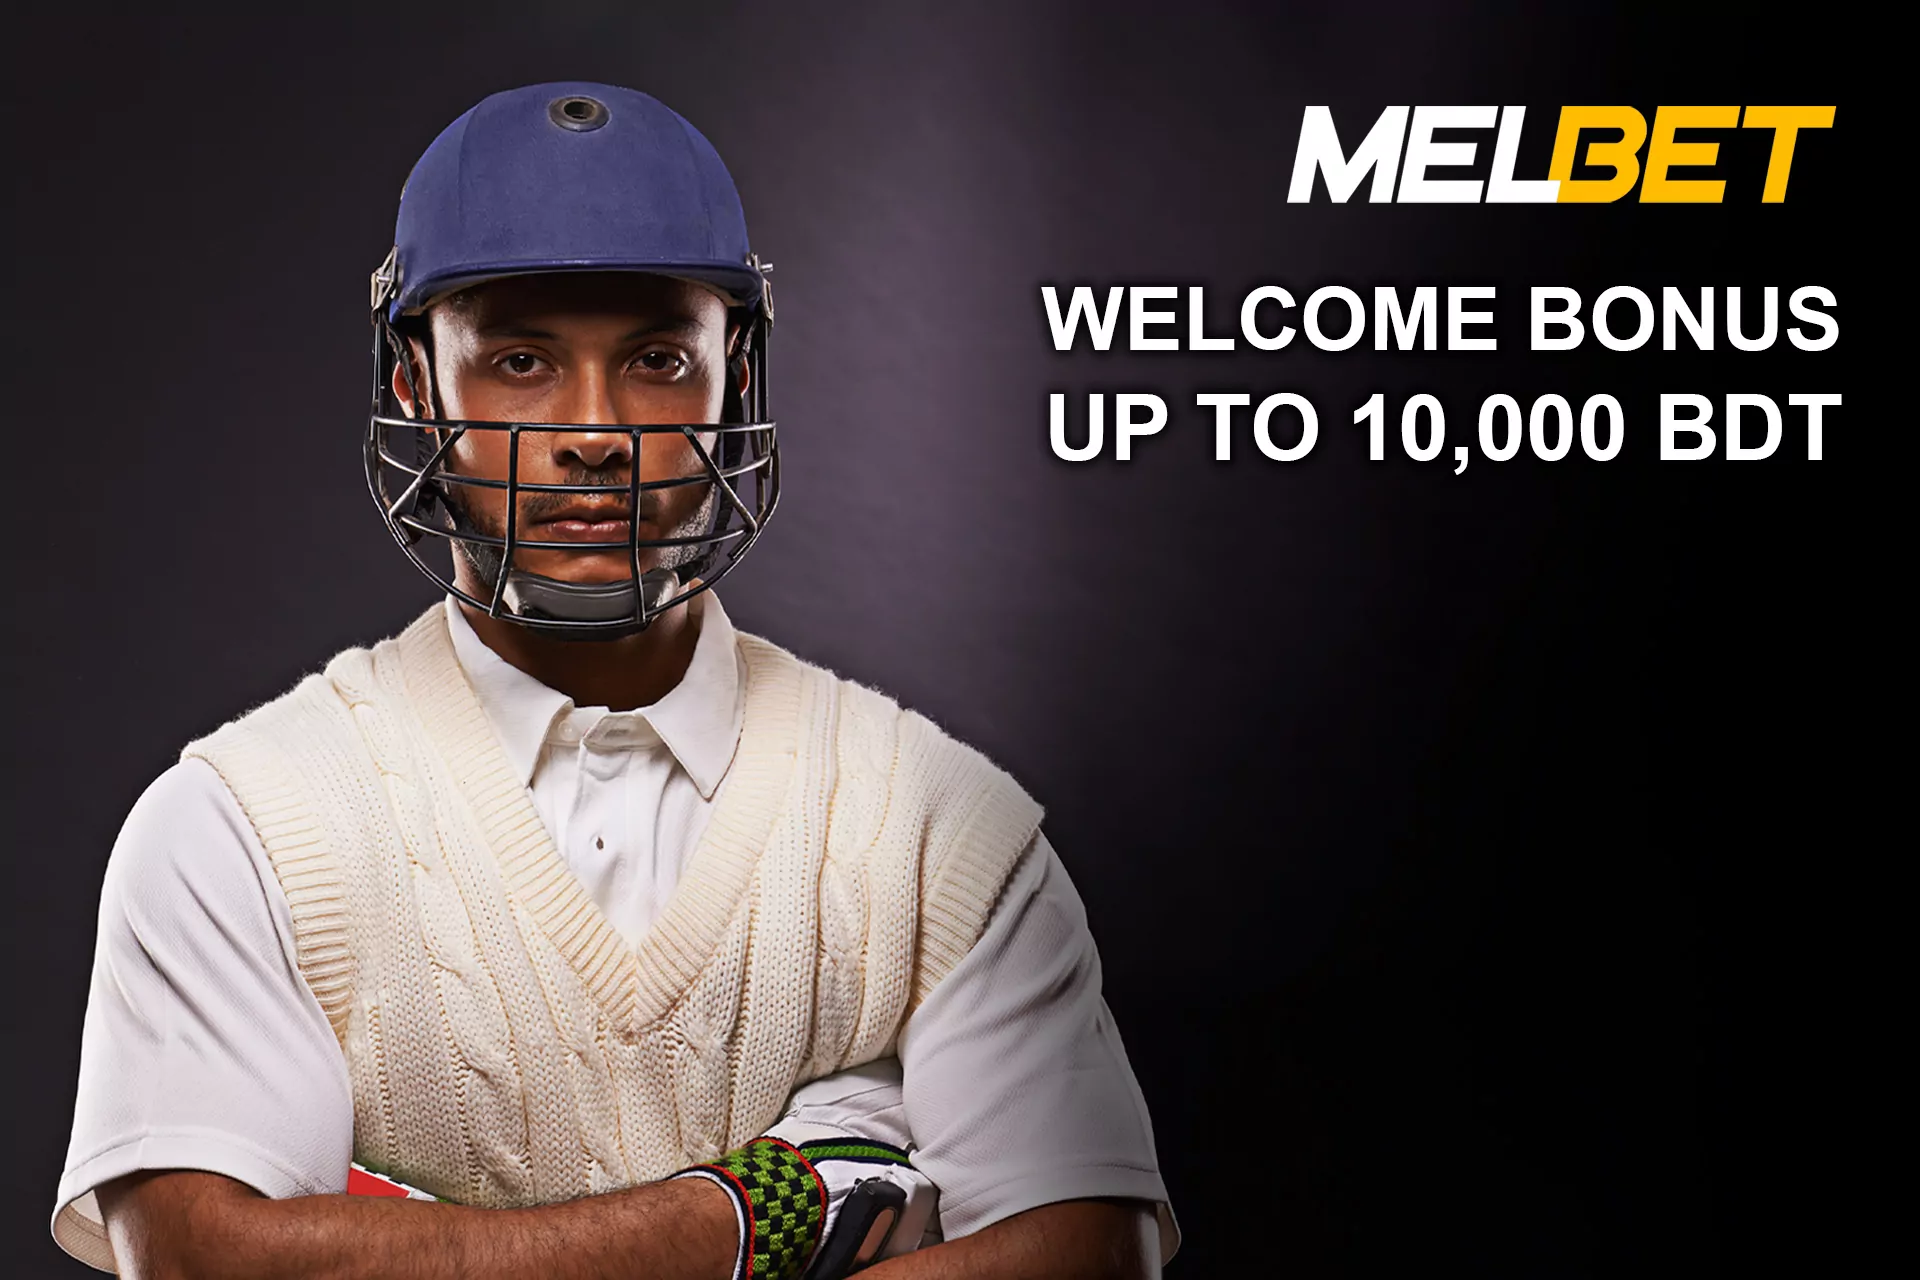 For new users, there is a welcome offer up to 10,000 BDT on betting.